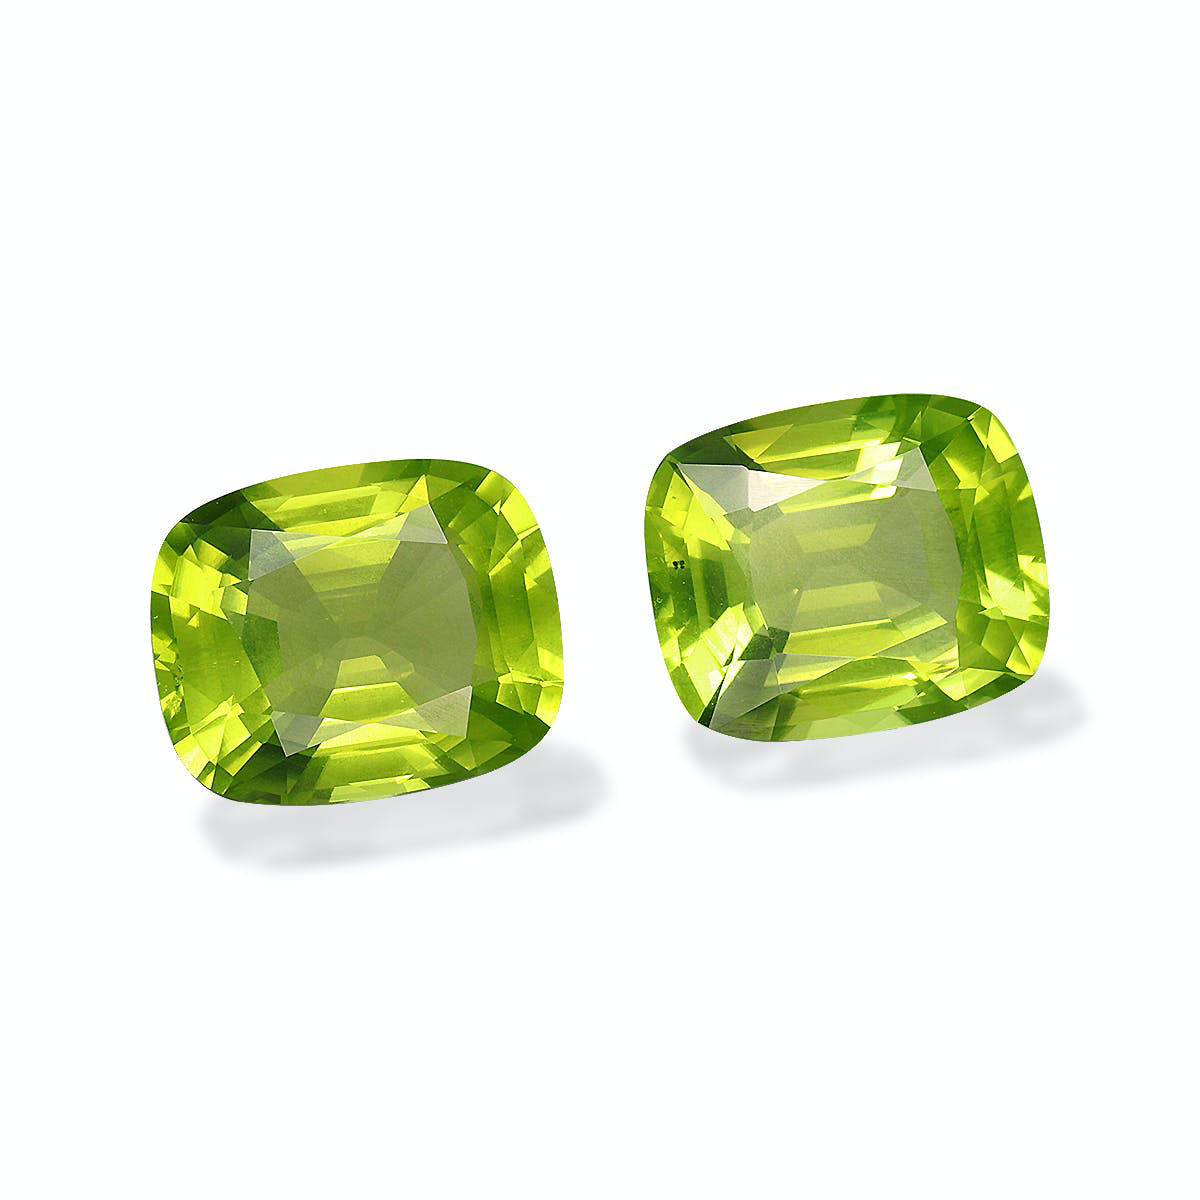 Picture of Lime Green Peridot 8.79ct - 11x9mm Pair (PD0084)